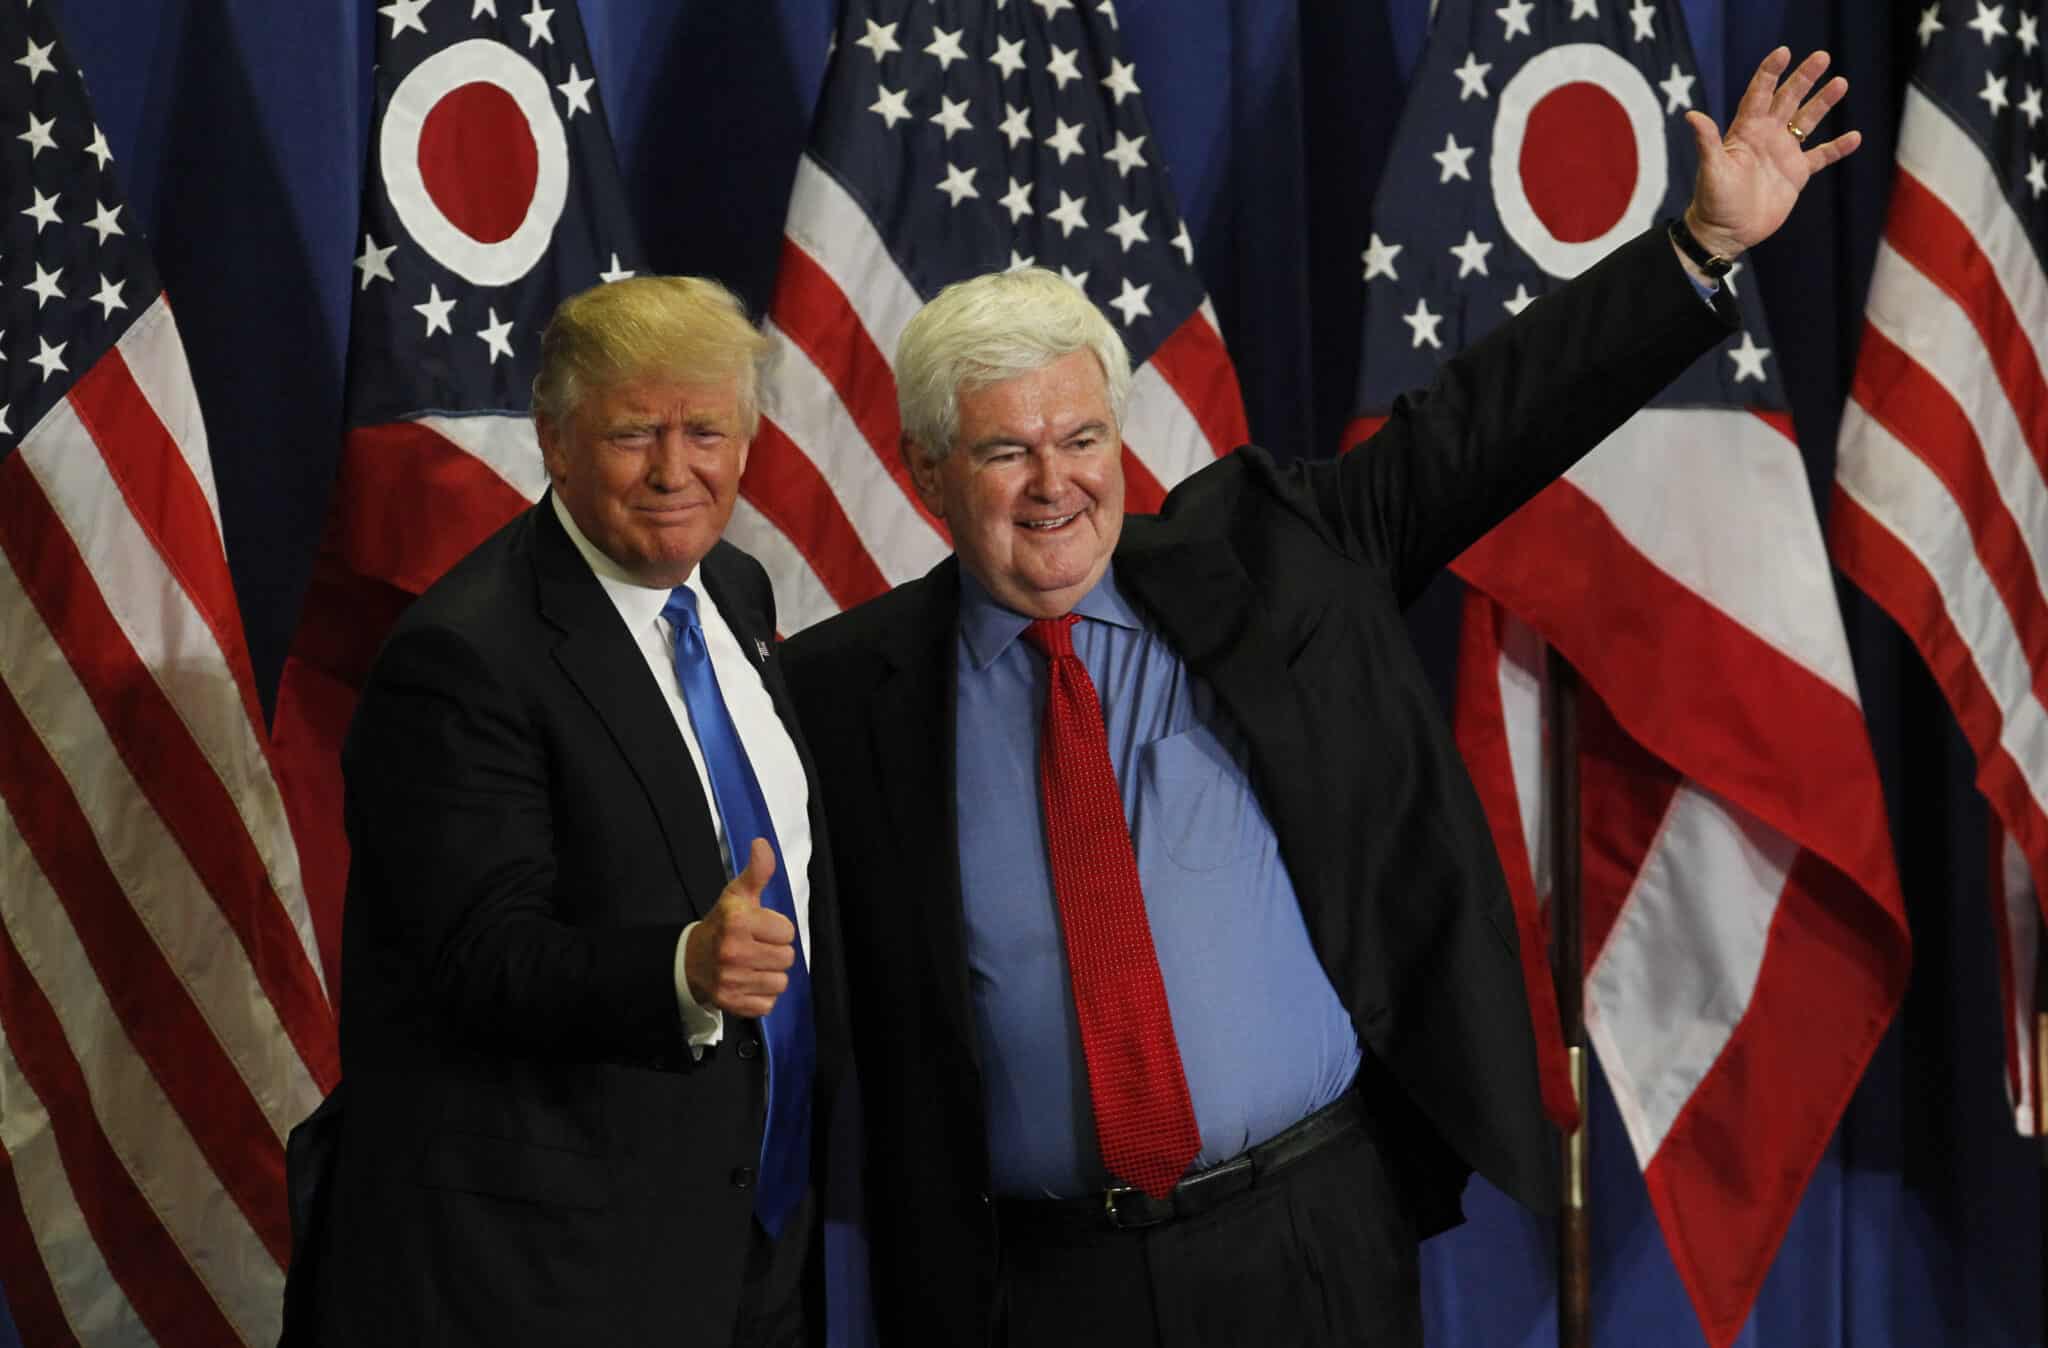 CINCINNATI, OH- JULY 6: Former Speaker of the House Newt Gingrich (R) introduces Republican Presidential candidate Donald Trump during a rally at the Sharonville Convention Center July 6, 2016, in Cincinnati, Ohio. Trump is campaigning  in Ohio ahead of the Republican National Convention in Cleveland next week.     (Photo by John Sommers II/Getty Images)